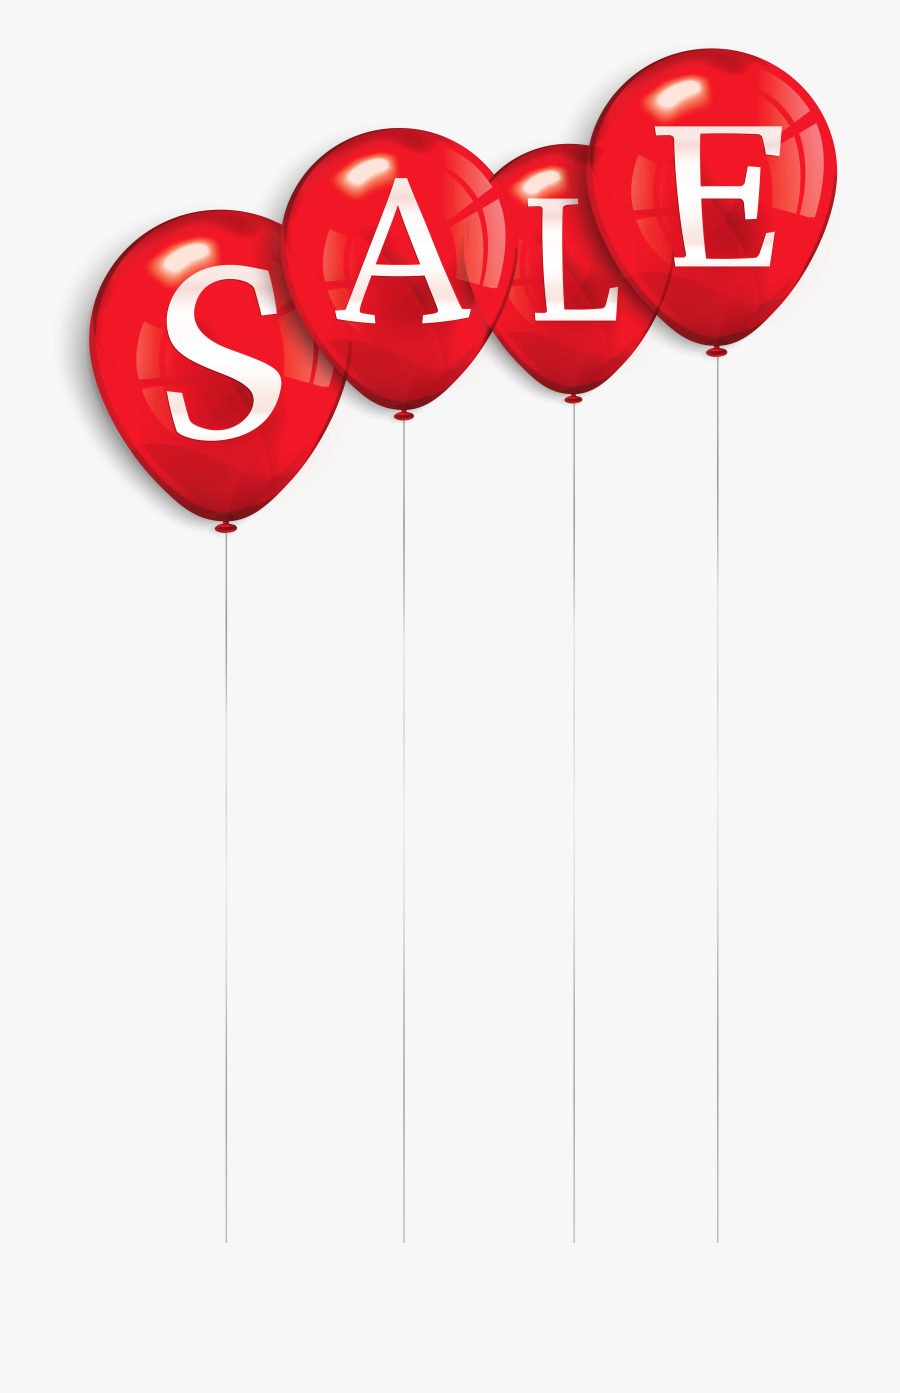 Sale Clipart Red - Sale Balloons Png, Transparent Clipart